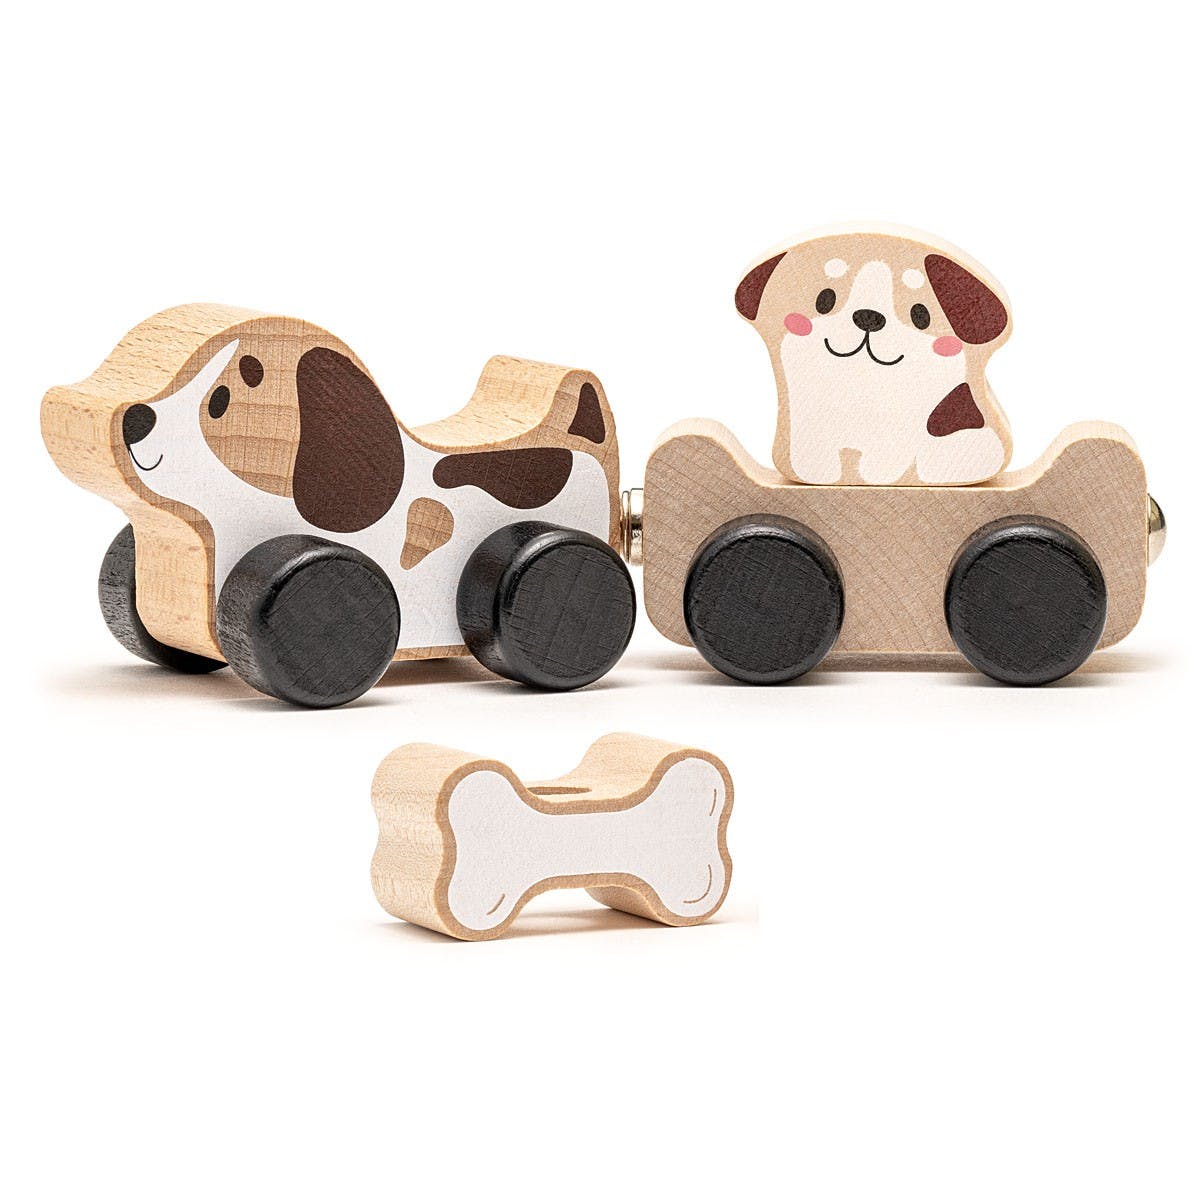 Cubika - Wooden toy "Clever Puppies" - Playlaan